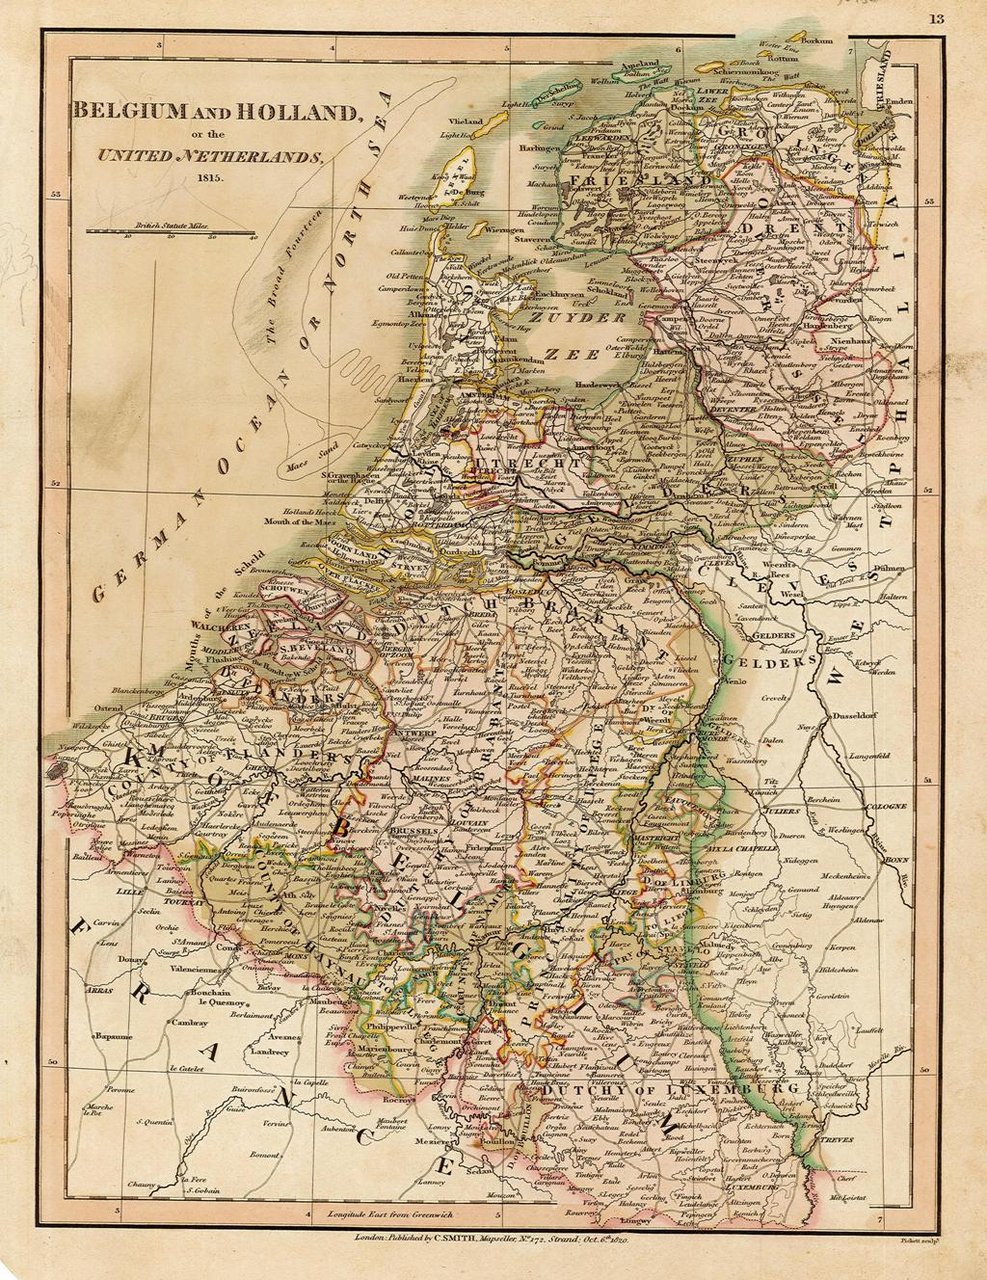 Belgium and Holland or the United Netherlands, 1815